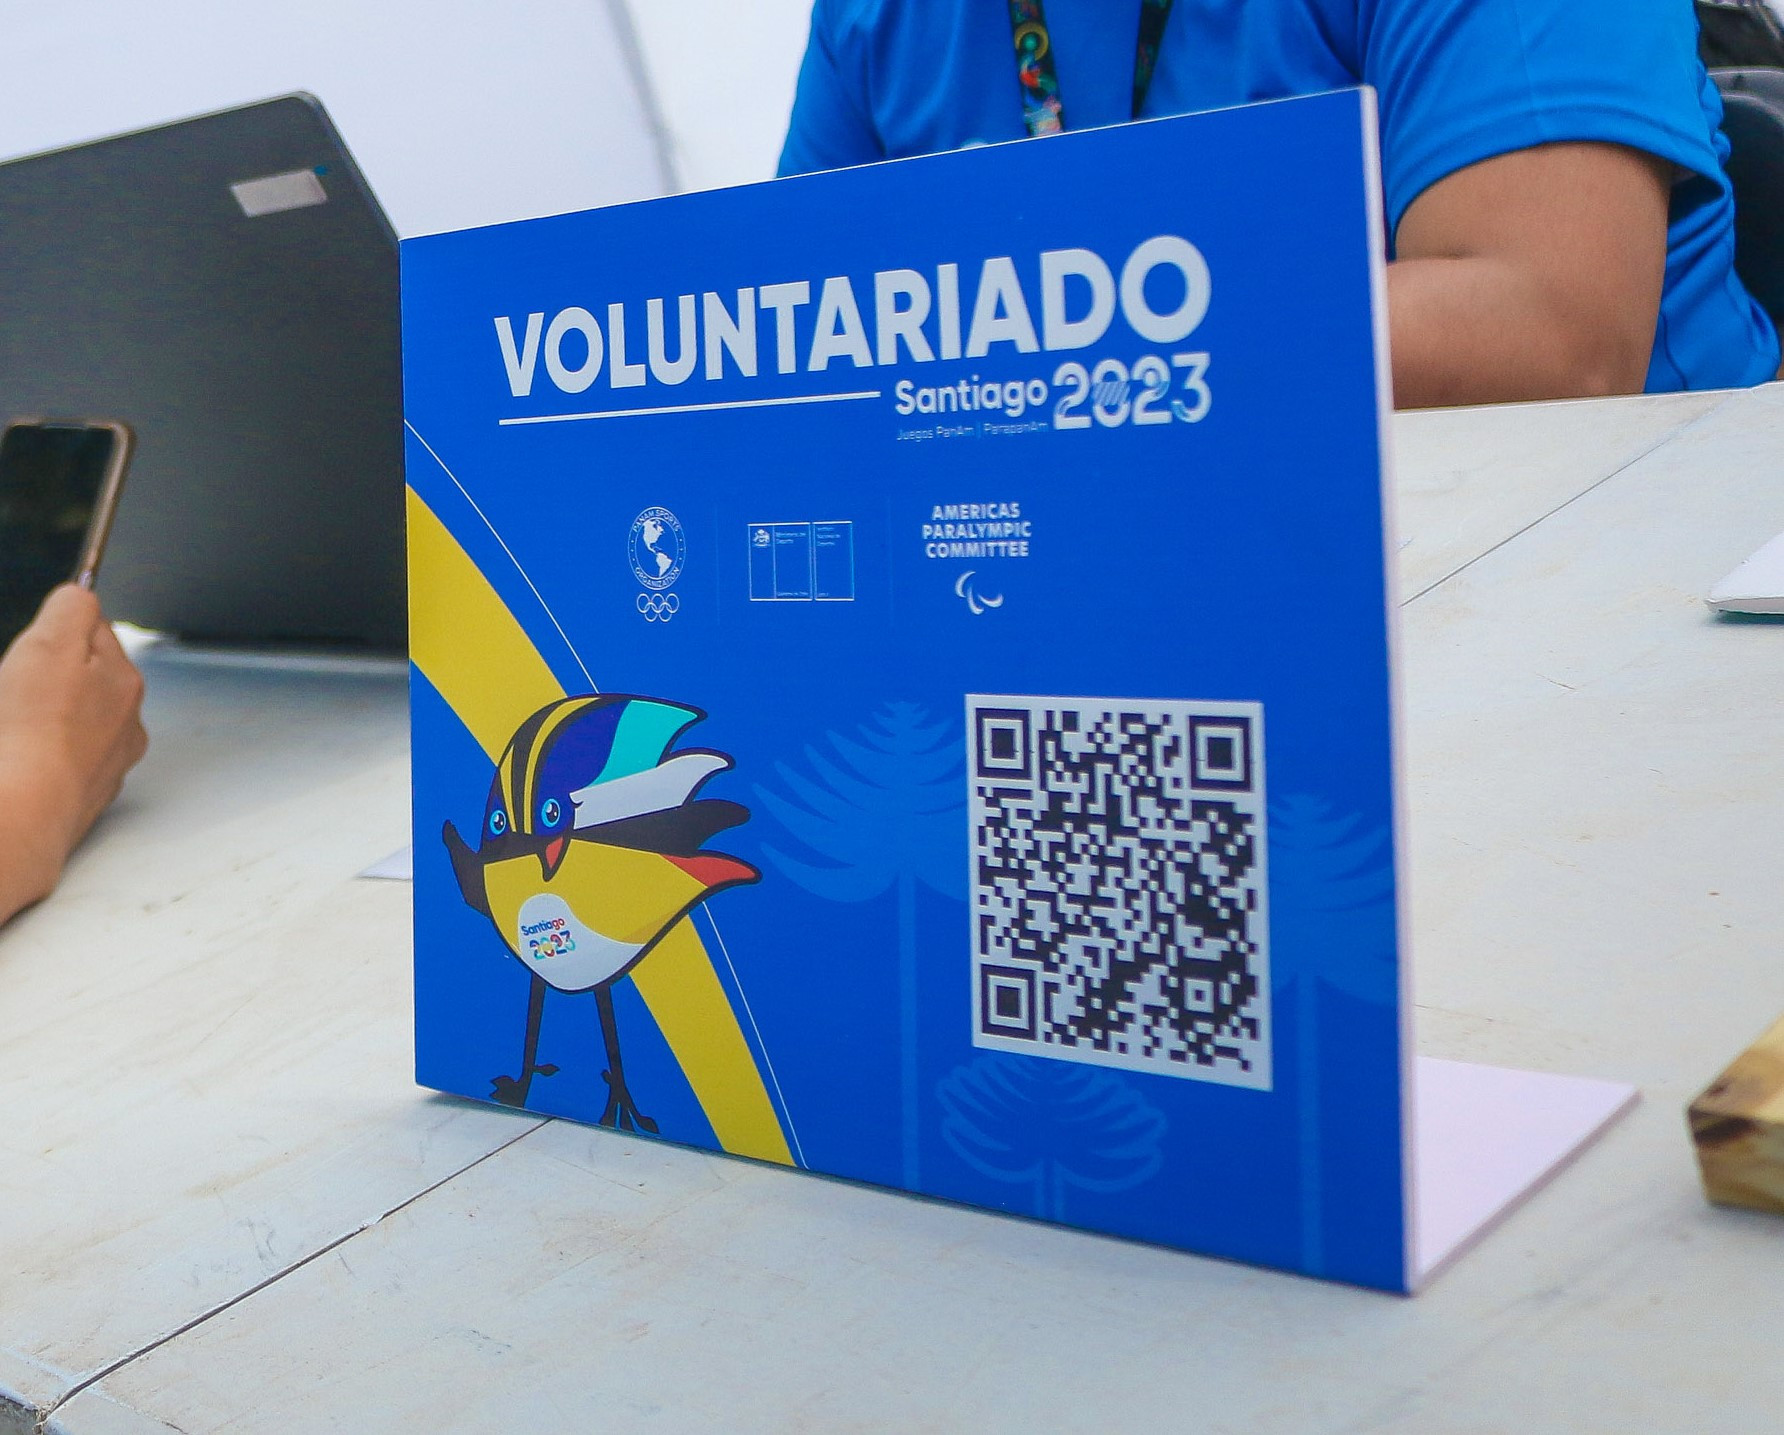 Santiago 2023 is on a recruitment drive for unpaid voluteers ©Santiago 2023